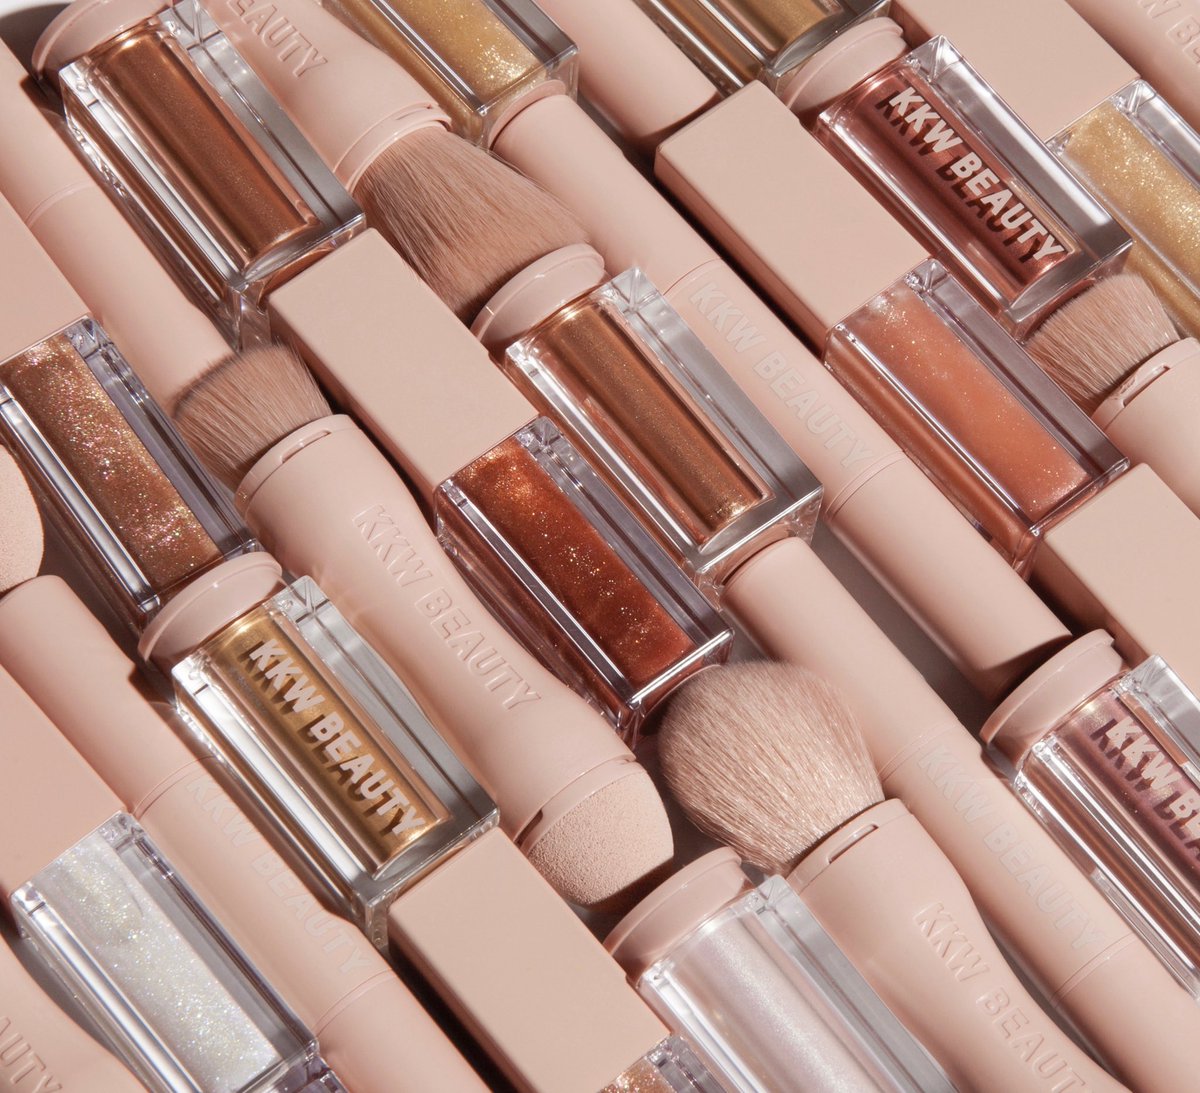 Ultralight Beams and Crème Contour Kits are back in stock! https://t.co/PoBZ3byUQI https://t.co/uun7YBAr6P